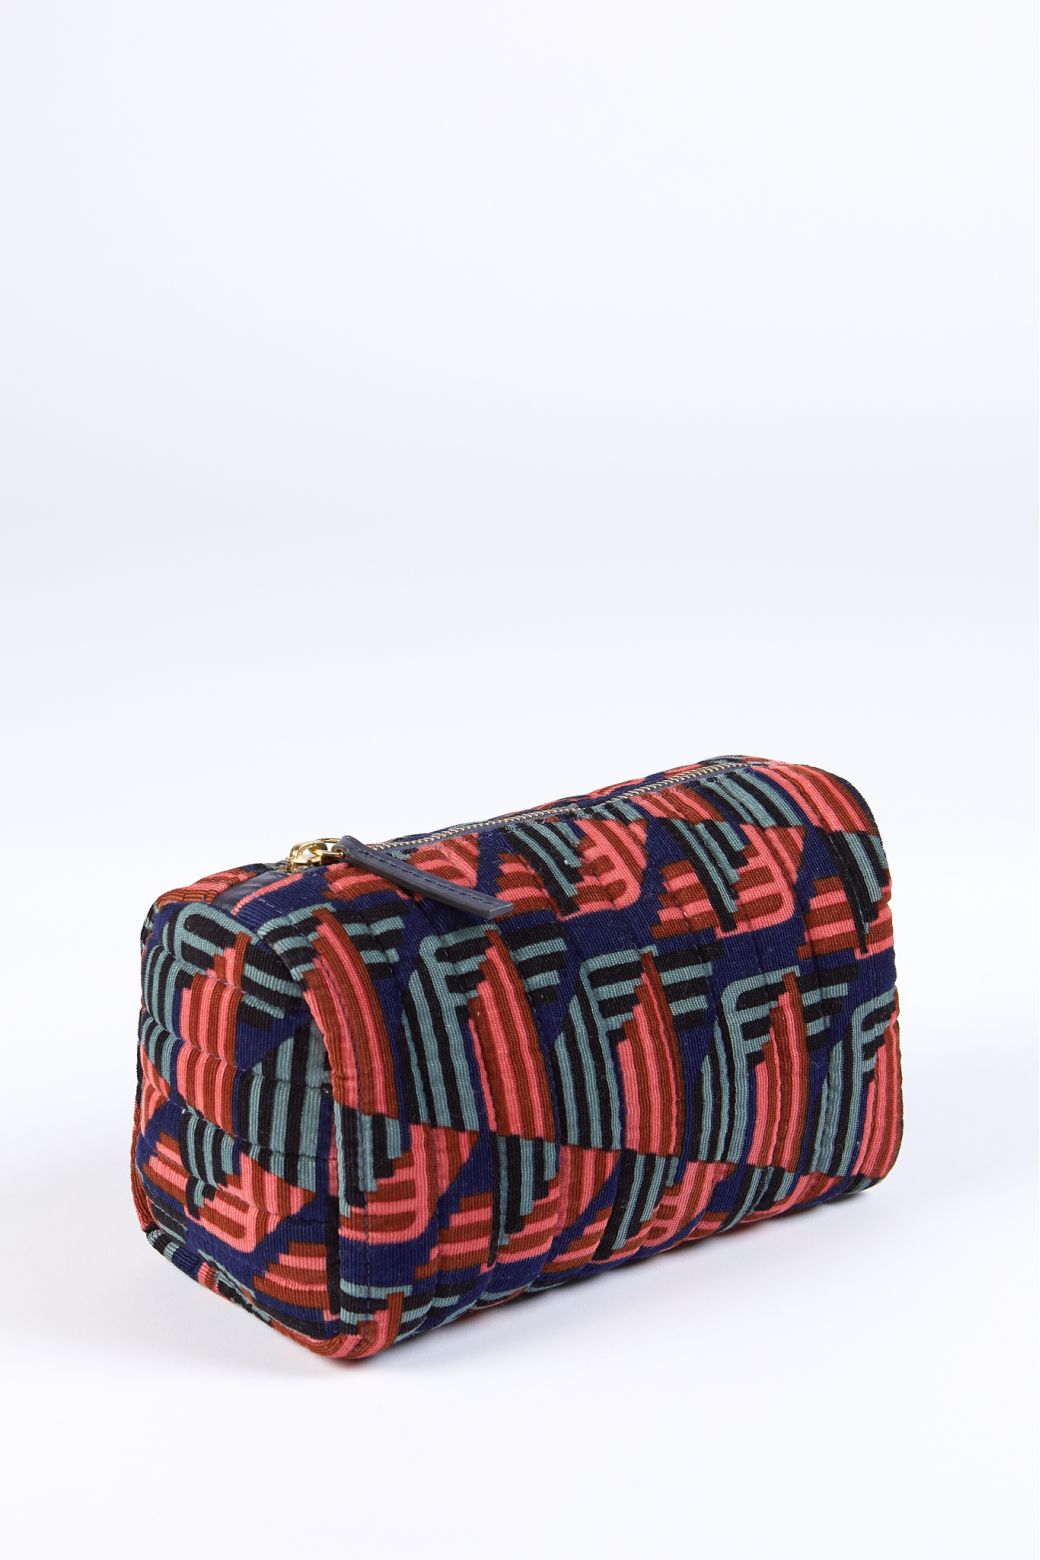 CORAL TRAVEL POUCH